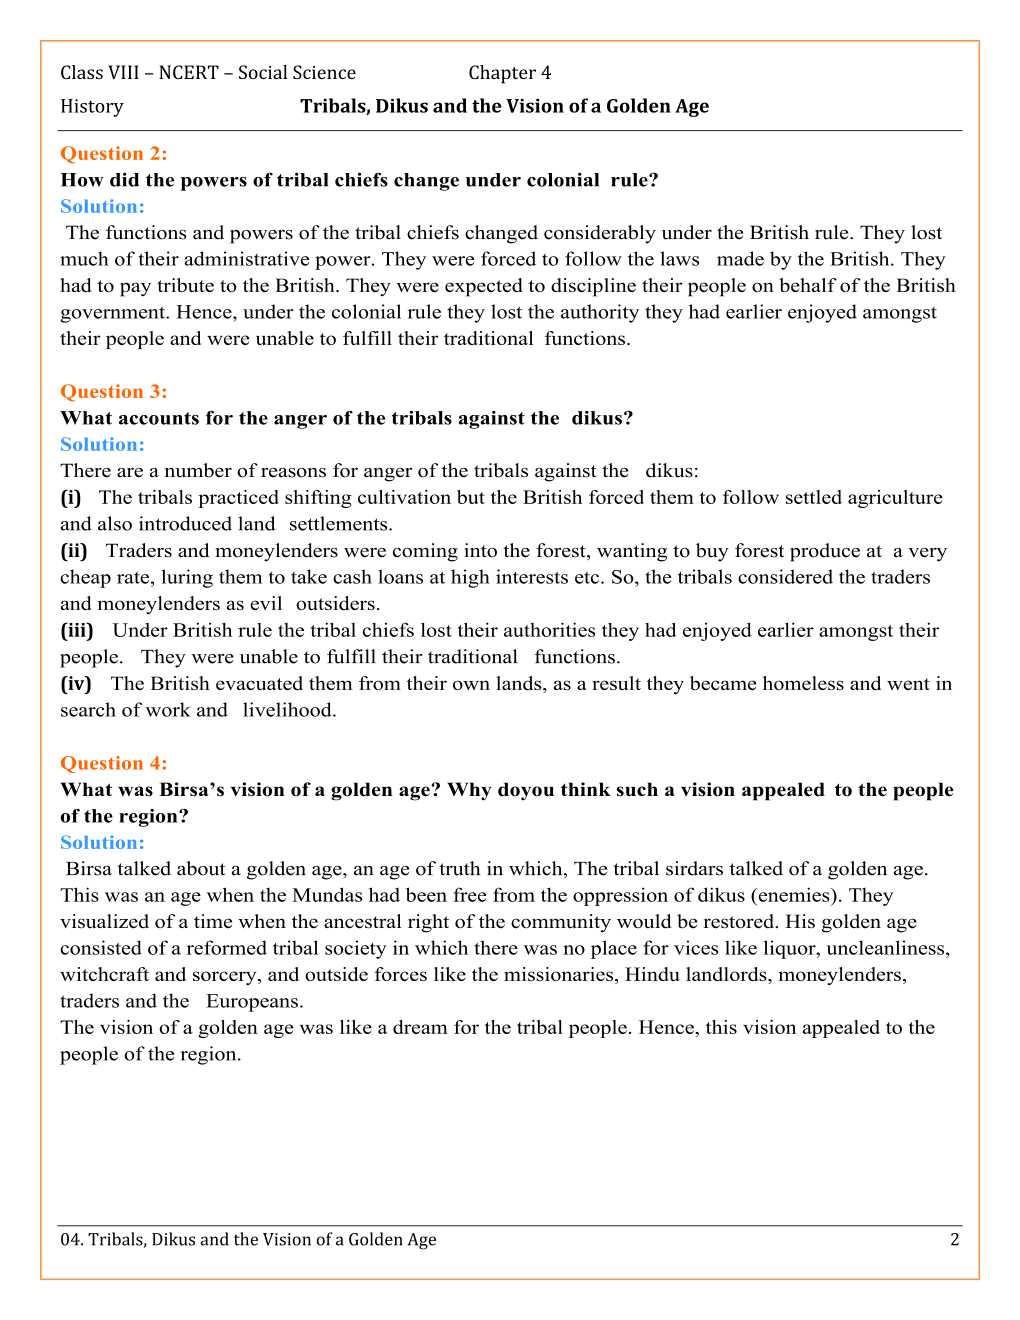 NCERT Solutions For Class 8 Social Science Our Pasts 3 Chapter 4